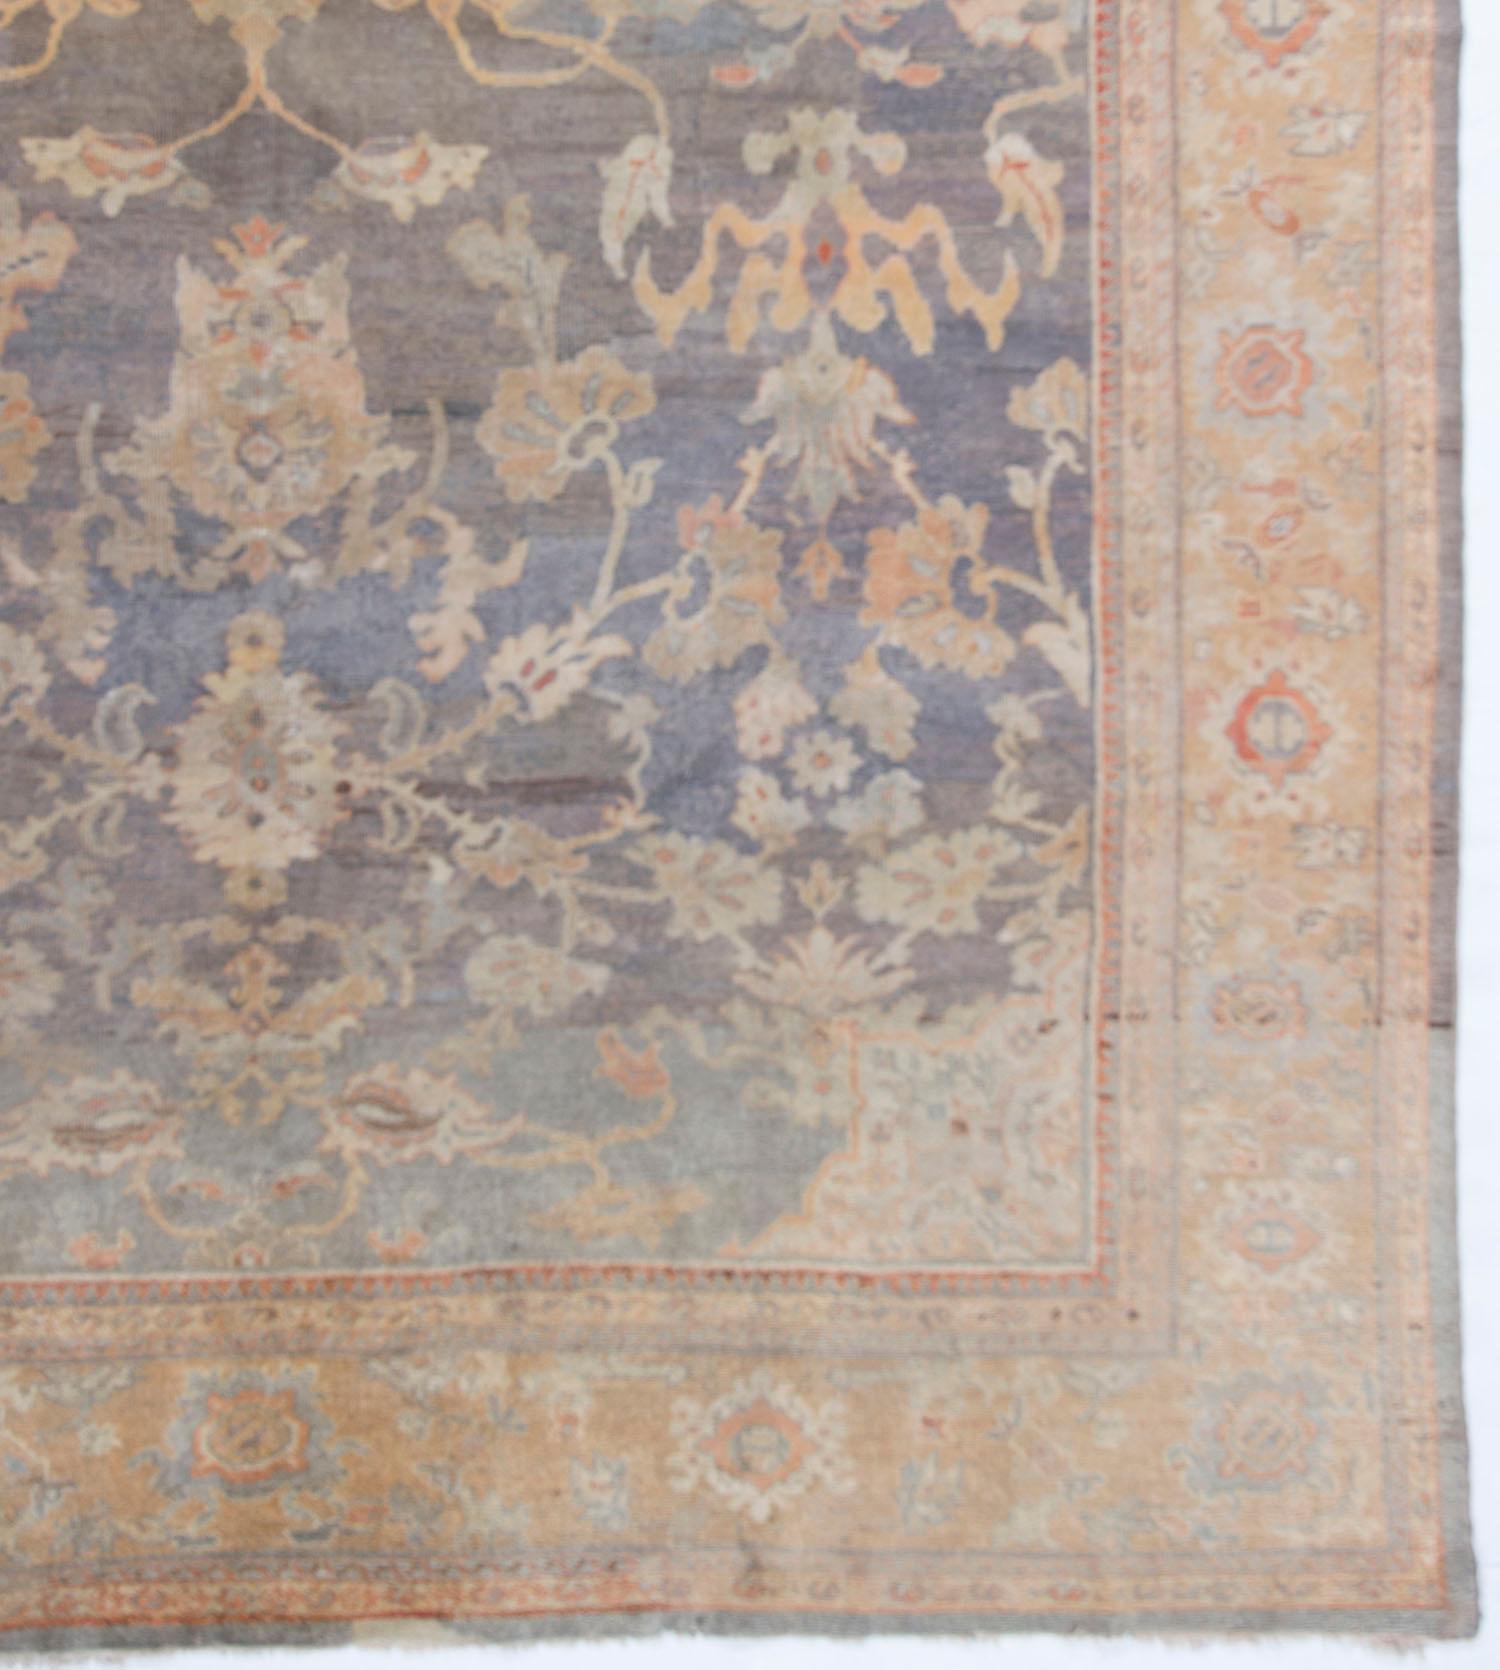 Antique Sultanabad blue rug carpet, 11' x 16'3. This attractive decorative carpet is probably a product of the Ziegler Company a major English firm active in Sultanabad in the 1880-1930 periods. The slate blue field is continuously but spaciously